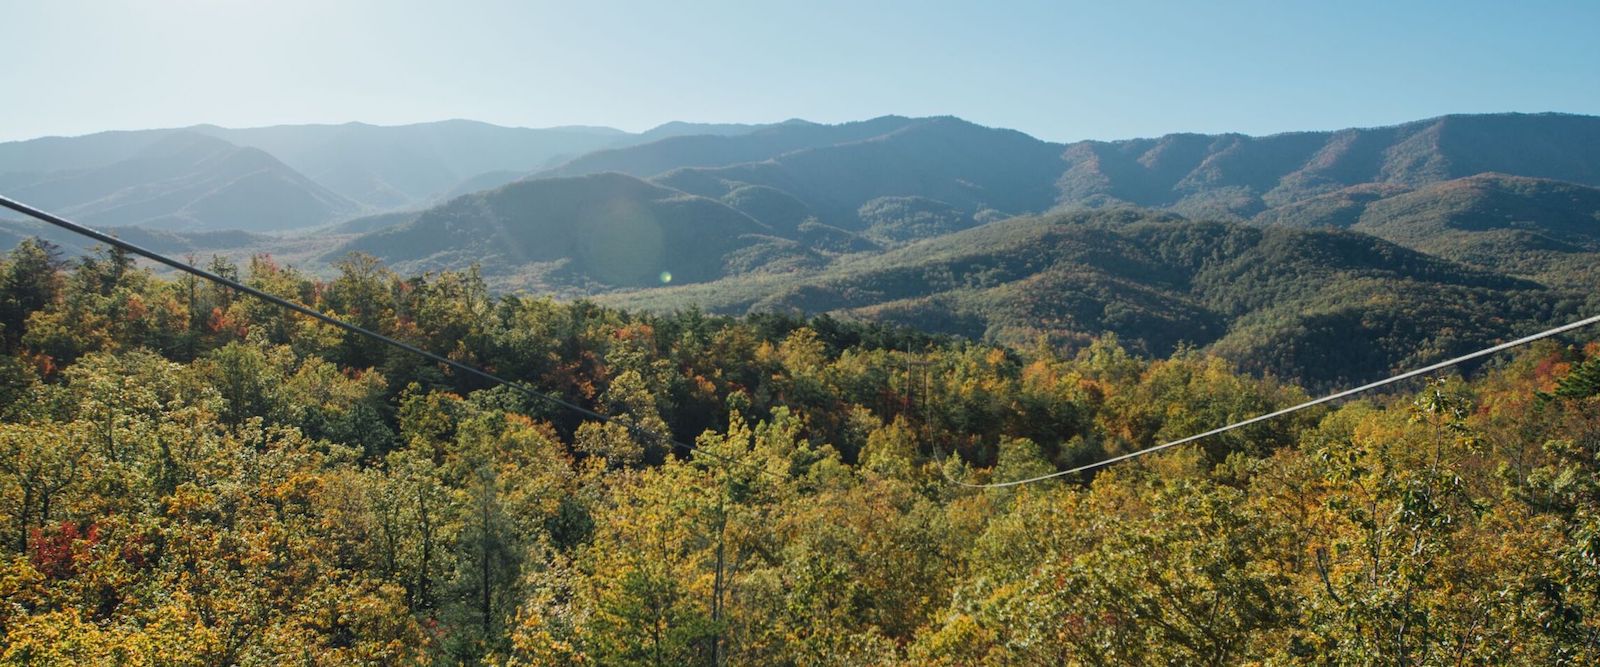 5 Things You Didn’t Know About the Great Smoky Mountains National Park